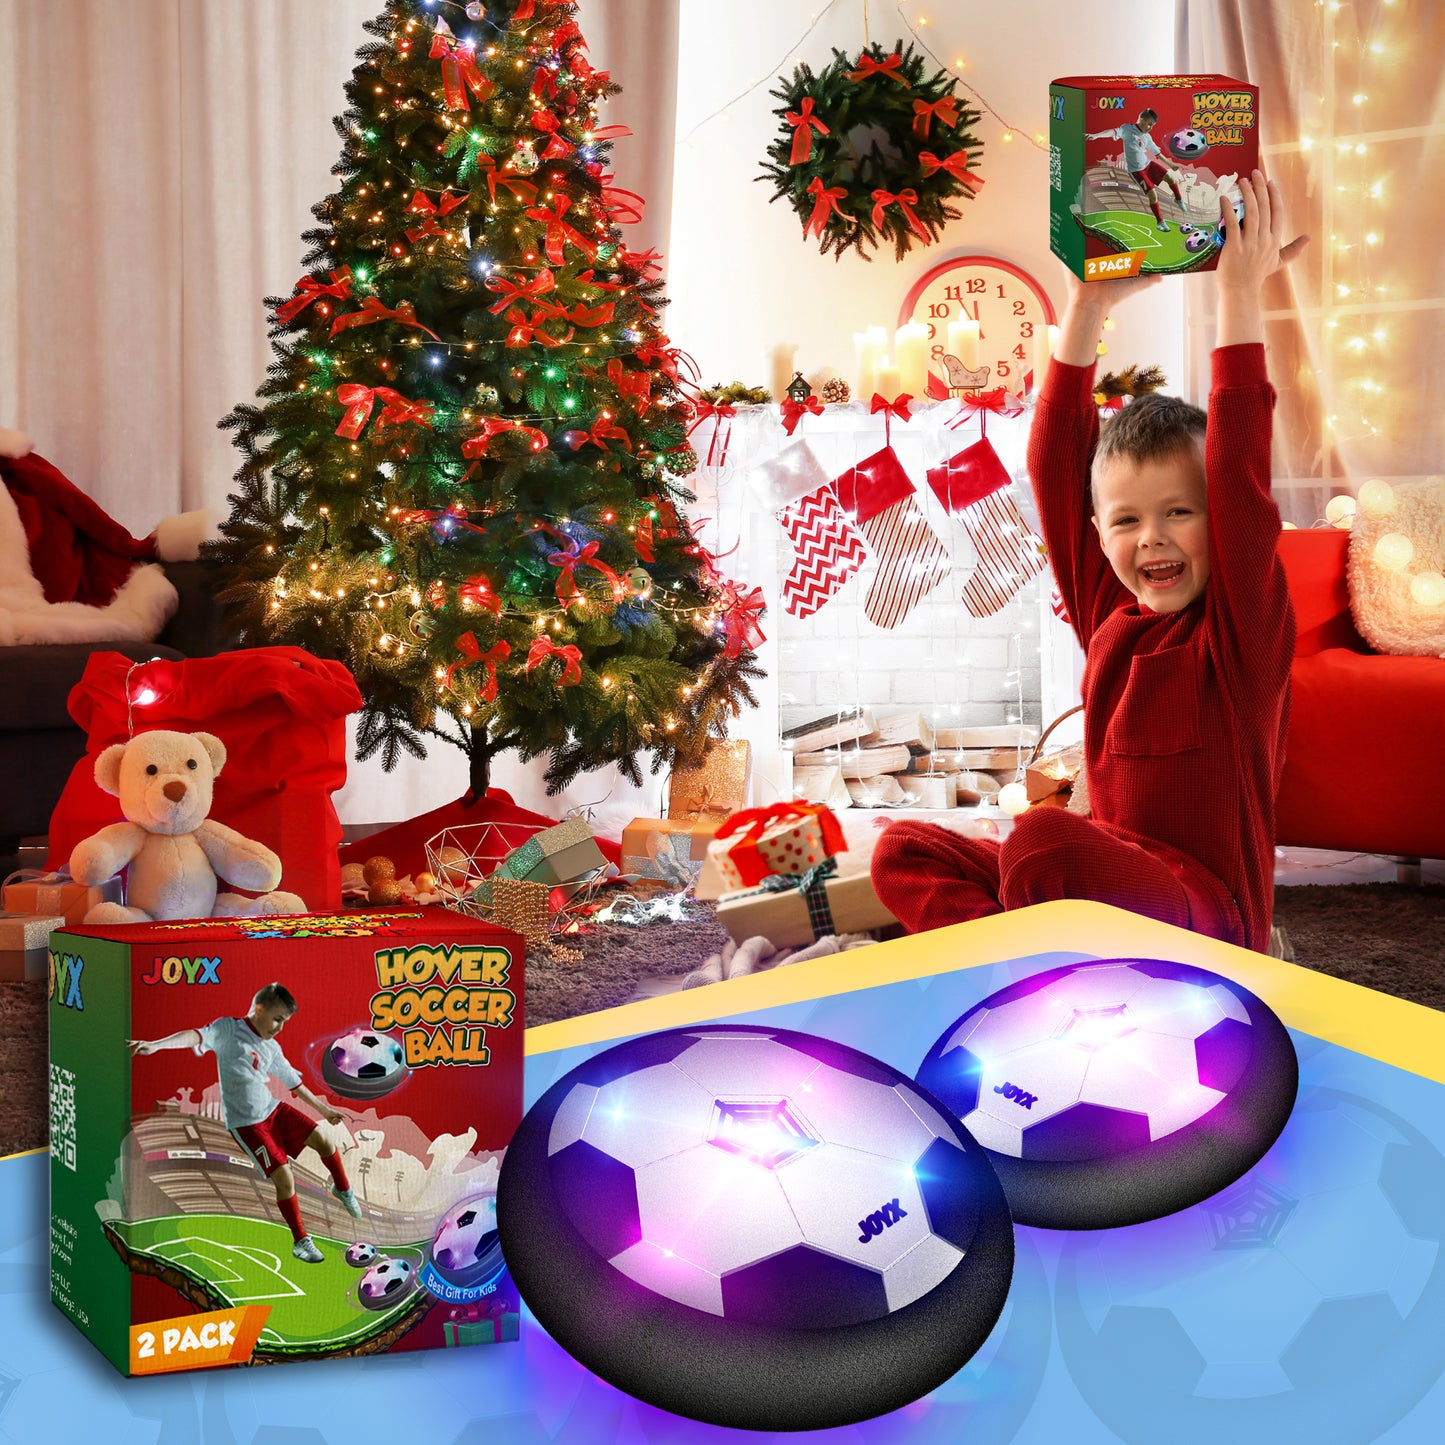 Excited child holding JOYX Hover Soccer Ball 2-Pack with illuminated Christmas tree and decorations in the background.